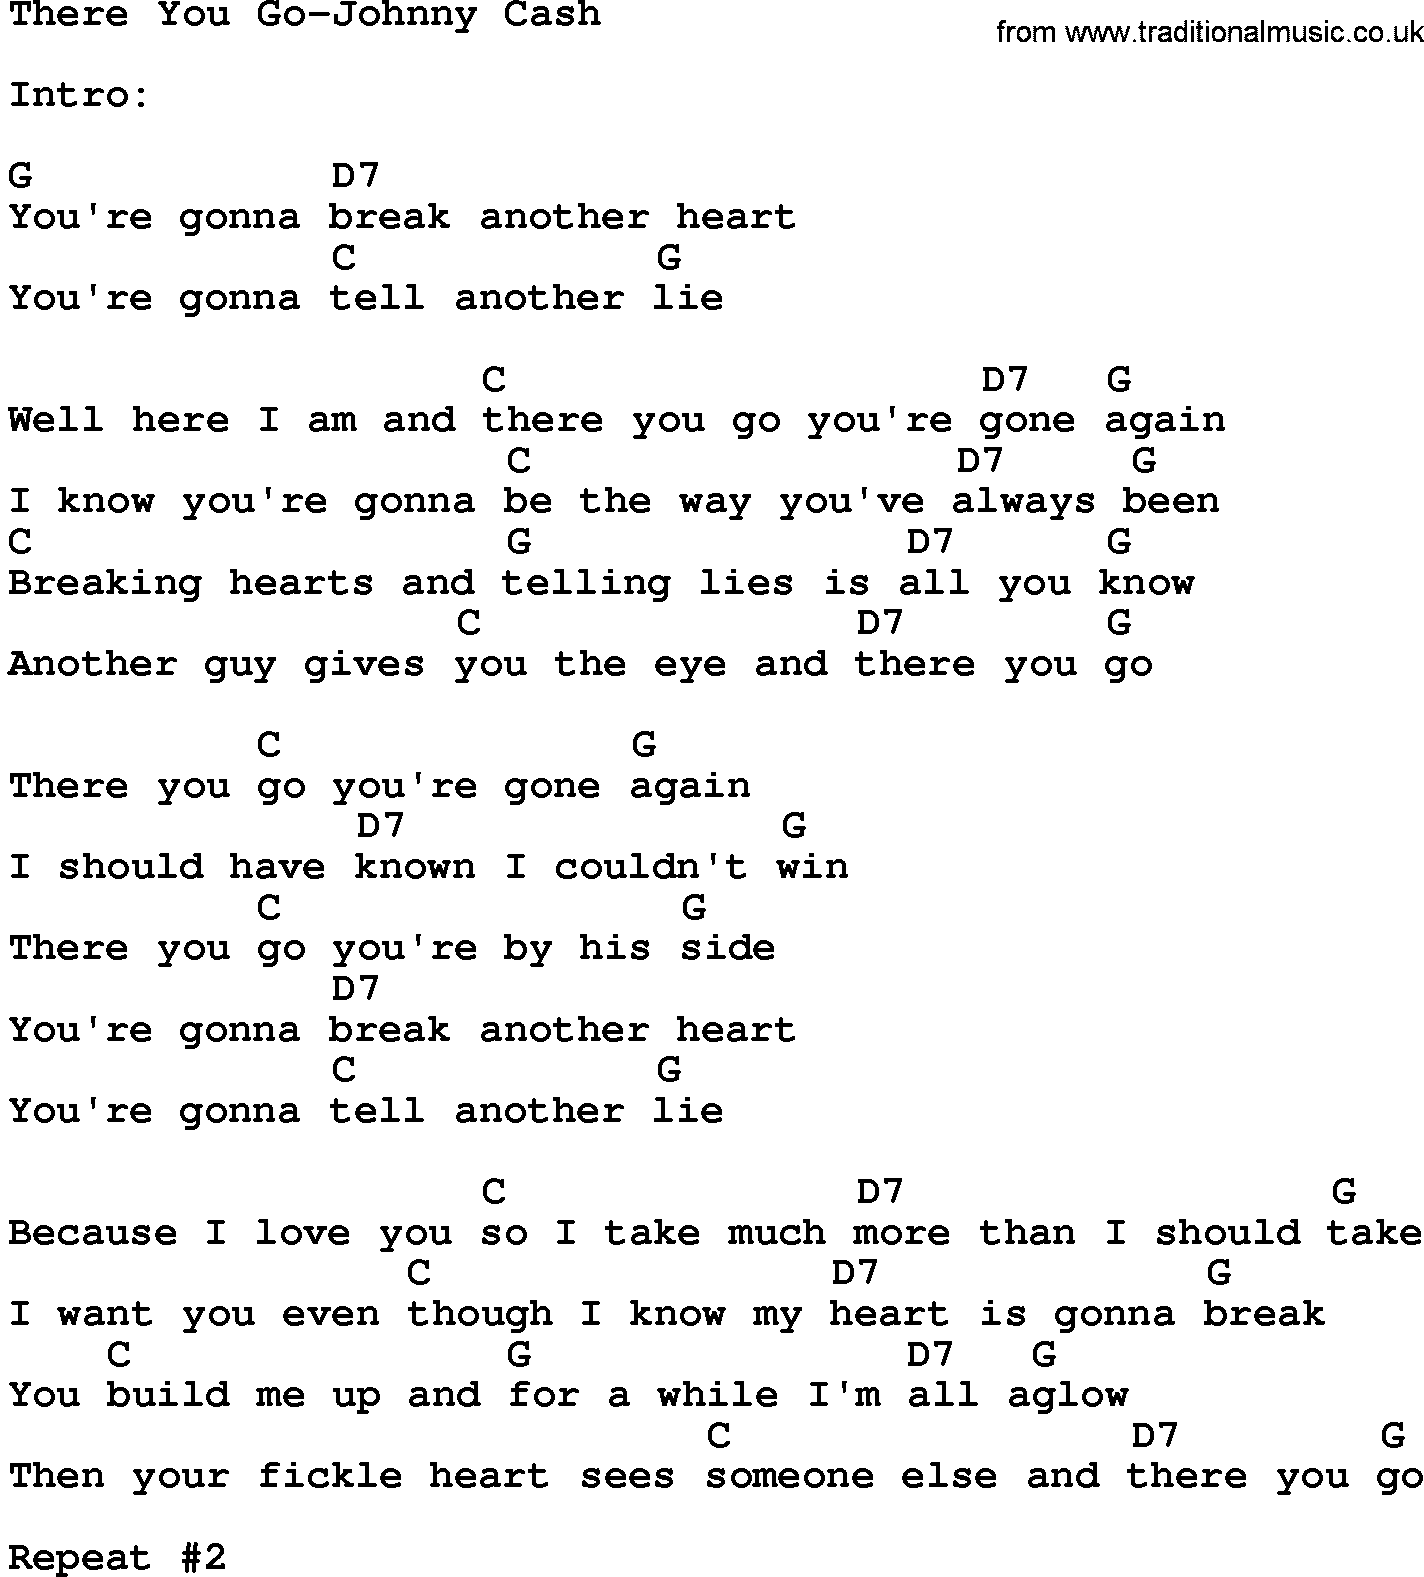 Country music song: There You Go-Johnny Cash lyrics and chords